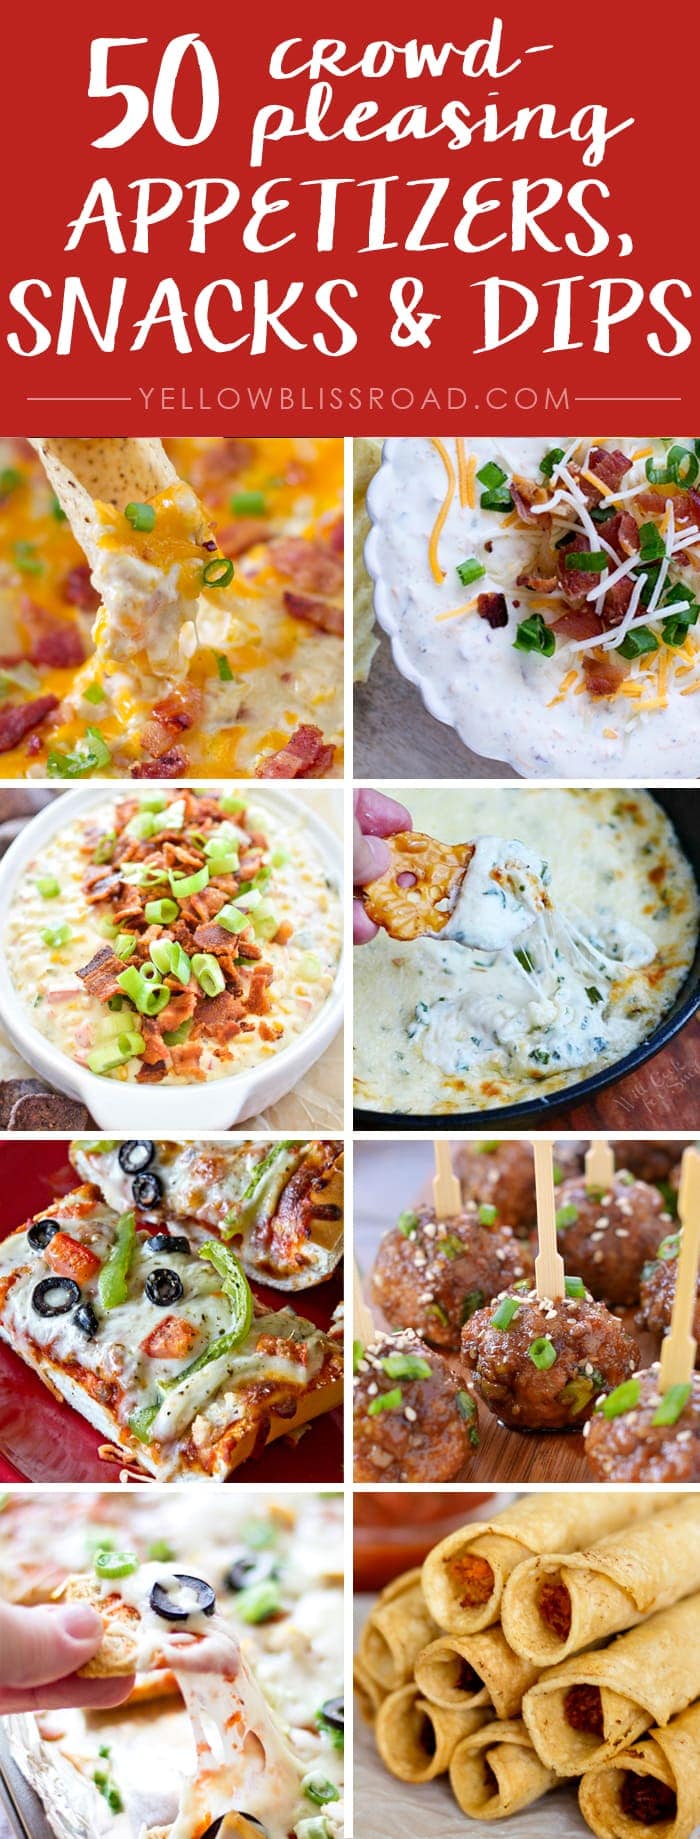 50 Crowd Pleasing Appetizers, Snack and Dips